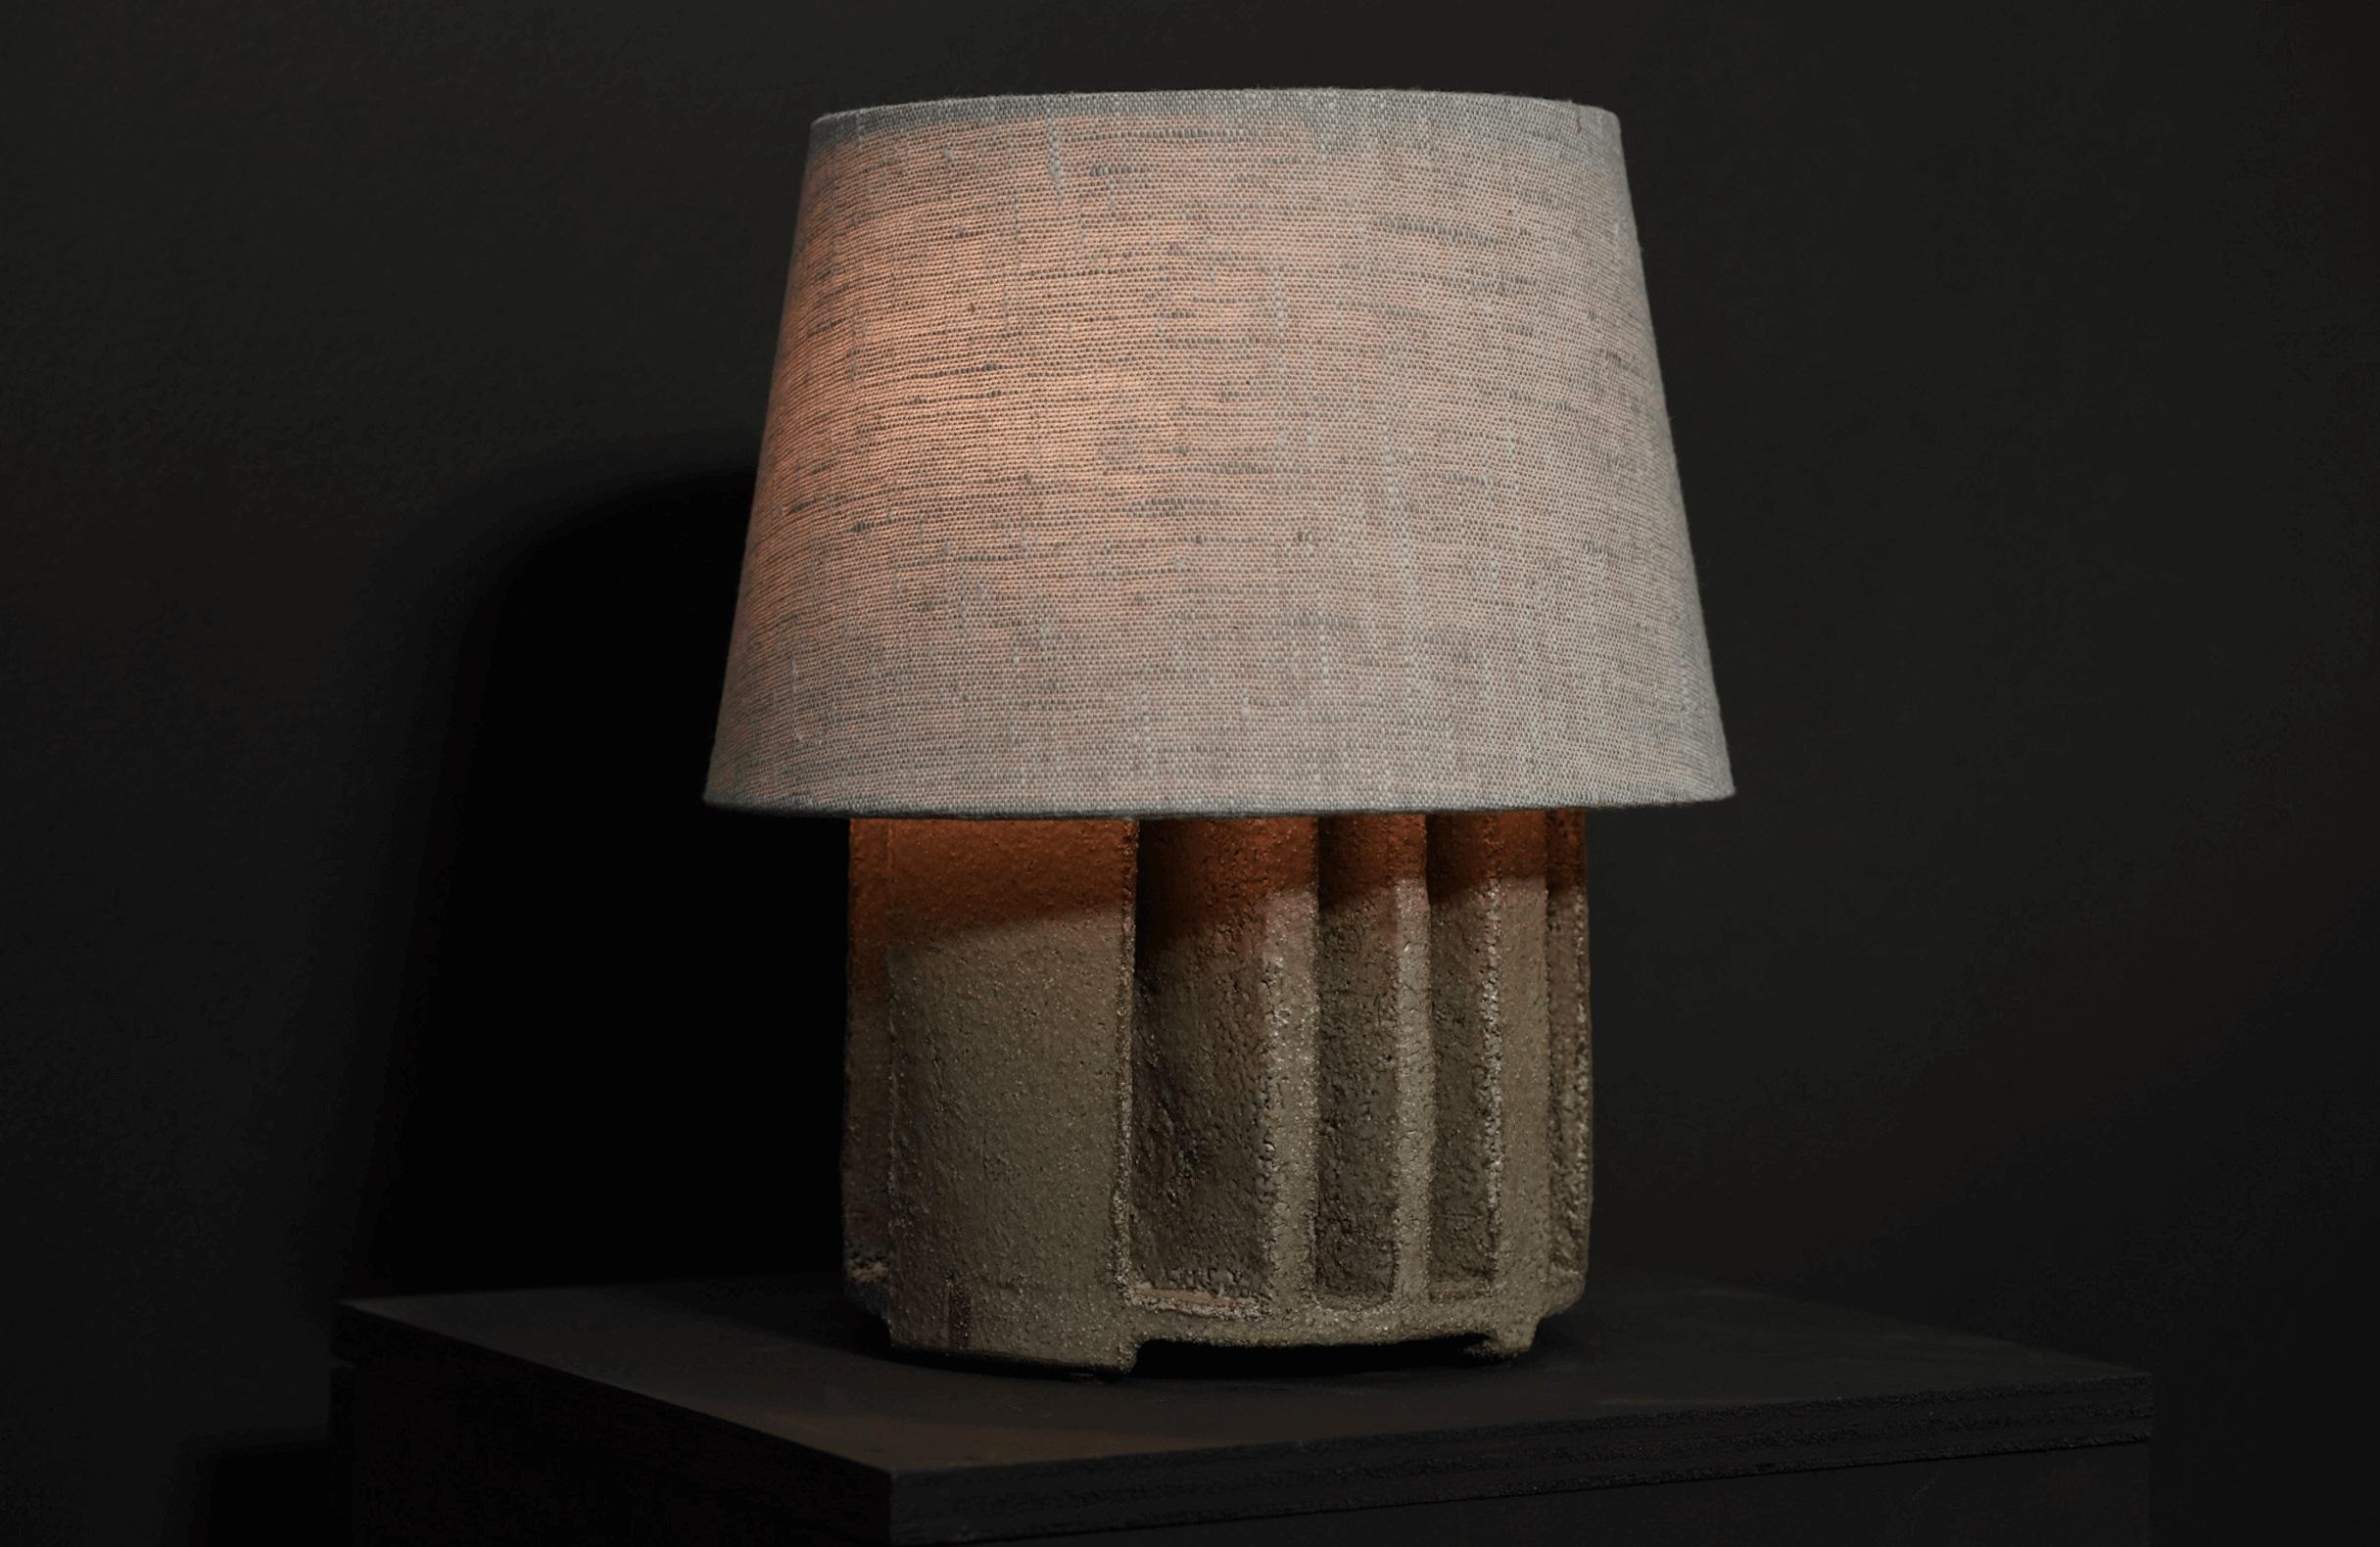 Materials: Ceramic
Origin: California
Dimensions: 6.5” Diameter Base X OAH 12”, Shade 9” Diameter
Quantity: 1
Type: Table Lamp

At STUDIO BALESTRA, we take pride in offering uniquely handmade ceramic lighting, meticulously crafted by skilled